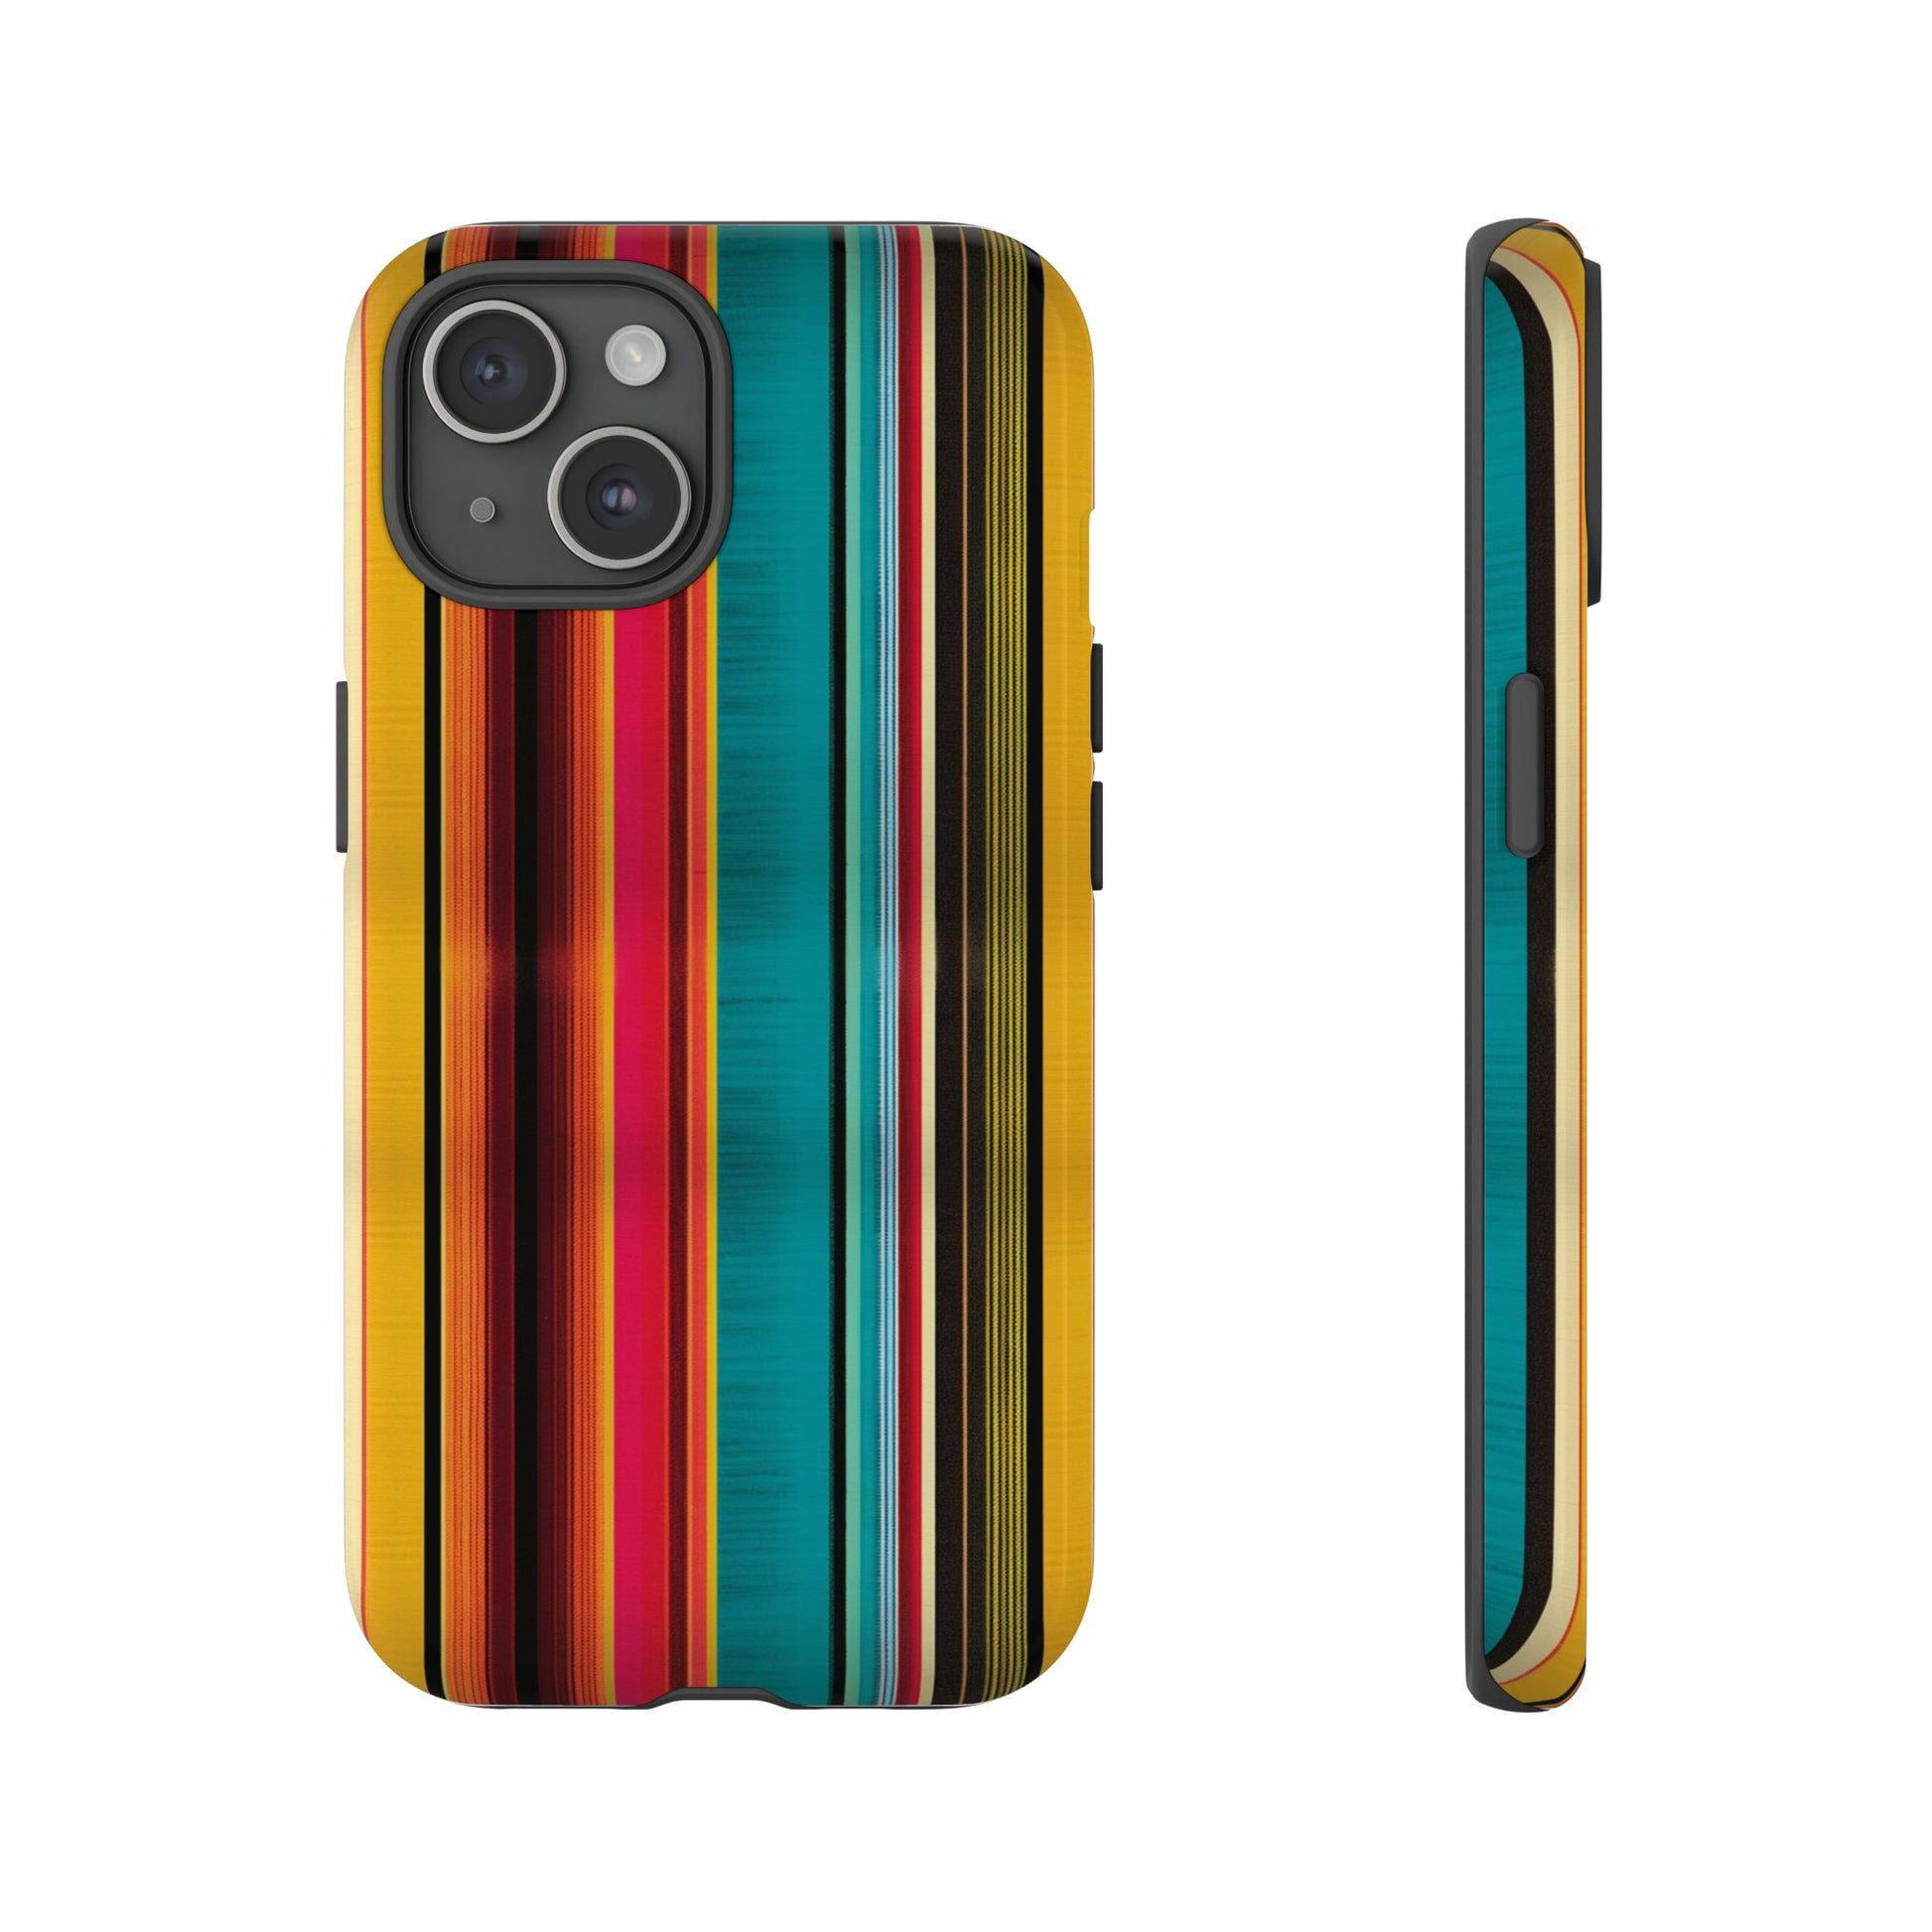 Native American inspired design on iPhone case